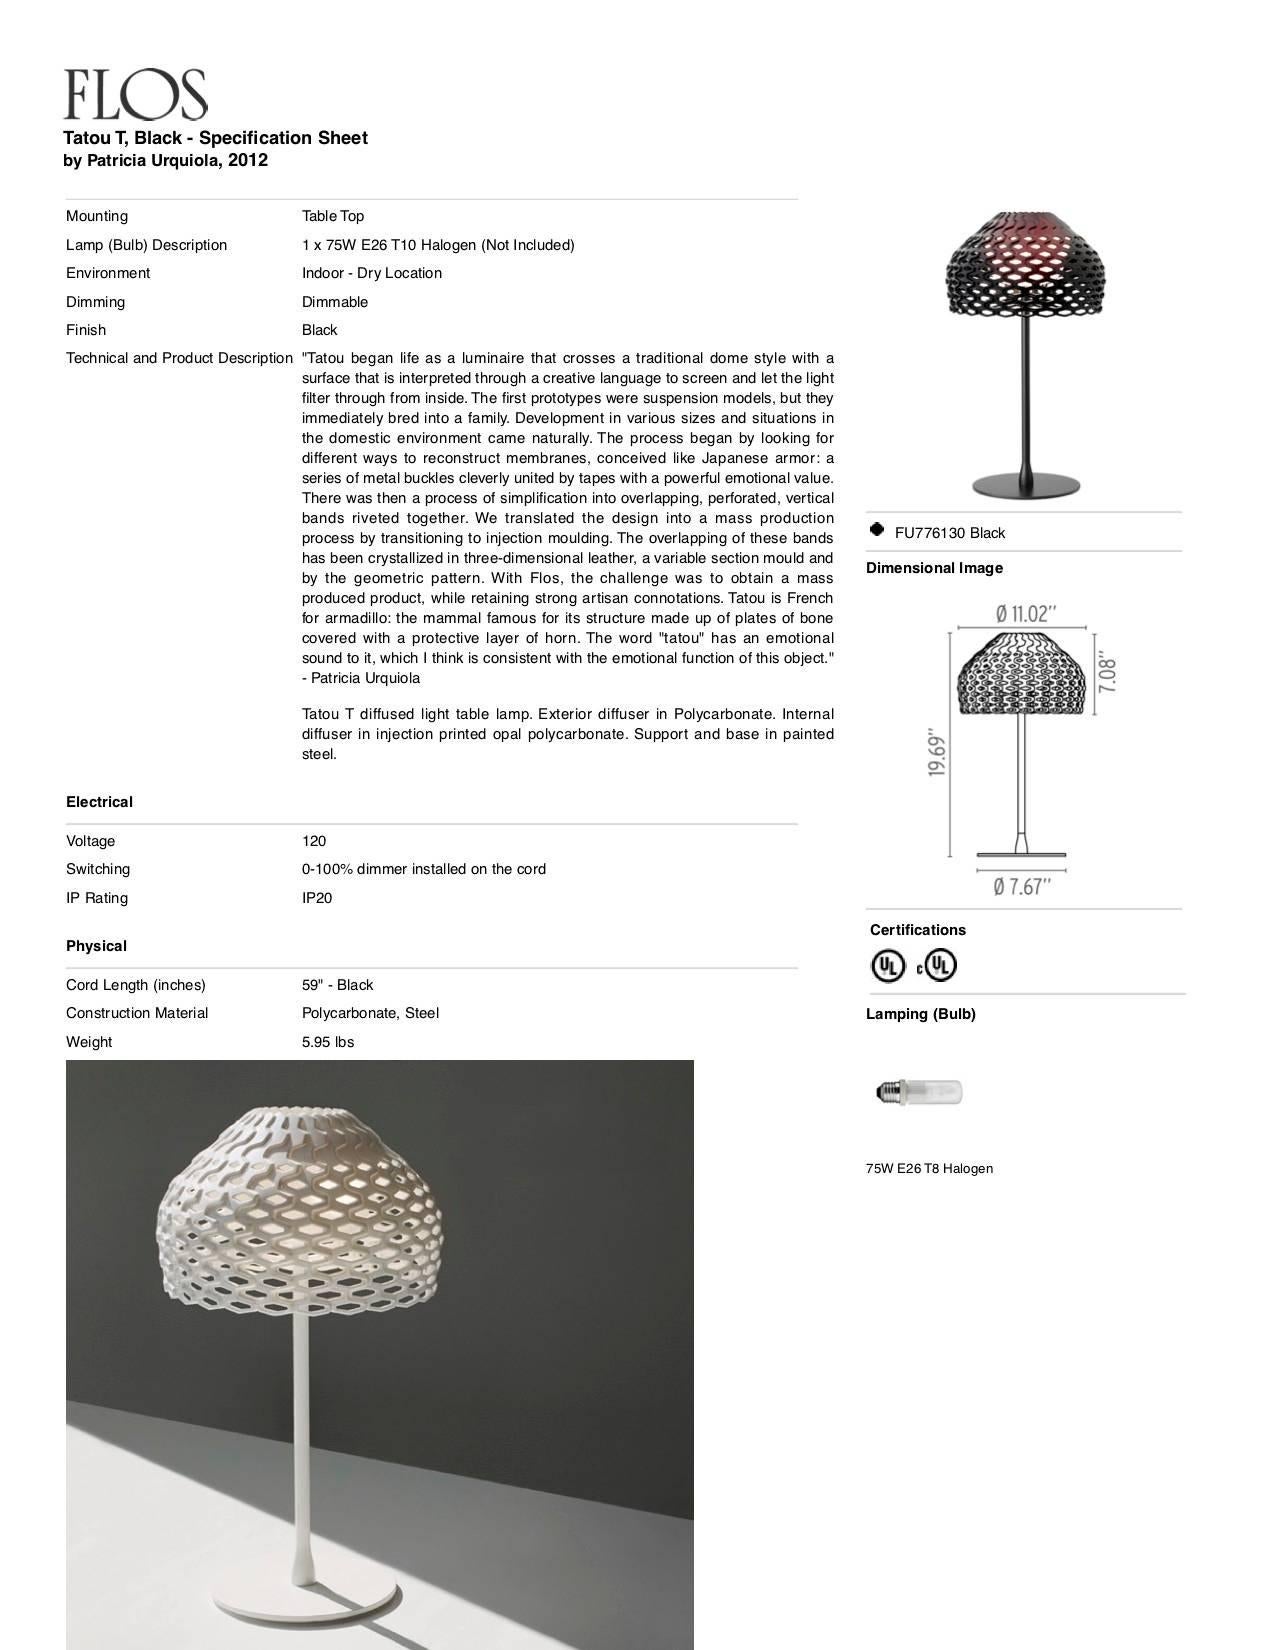 Steel FLOS Tatou T1 Dimmable Halogen Table Lamp in Black by Patricia Urquiola